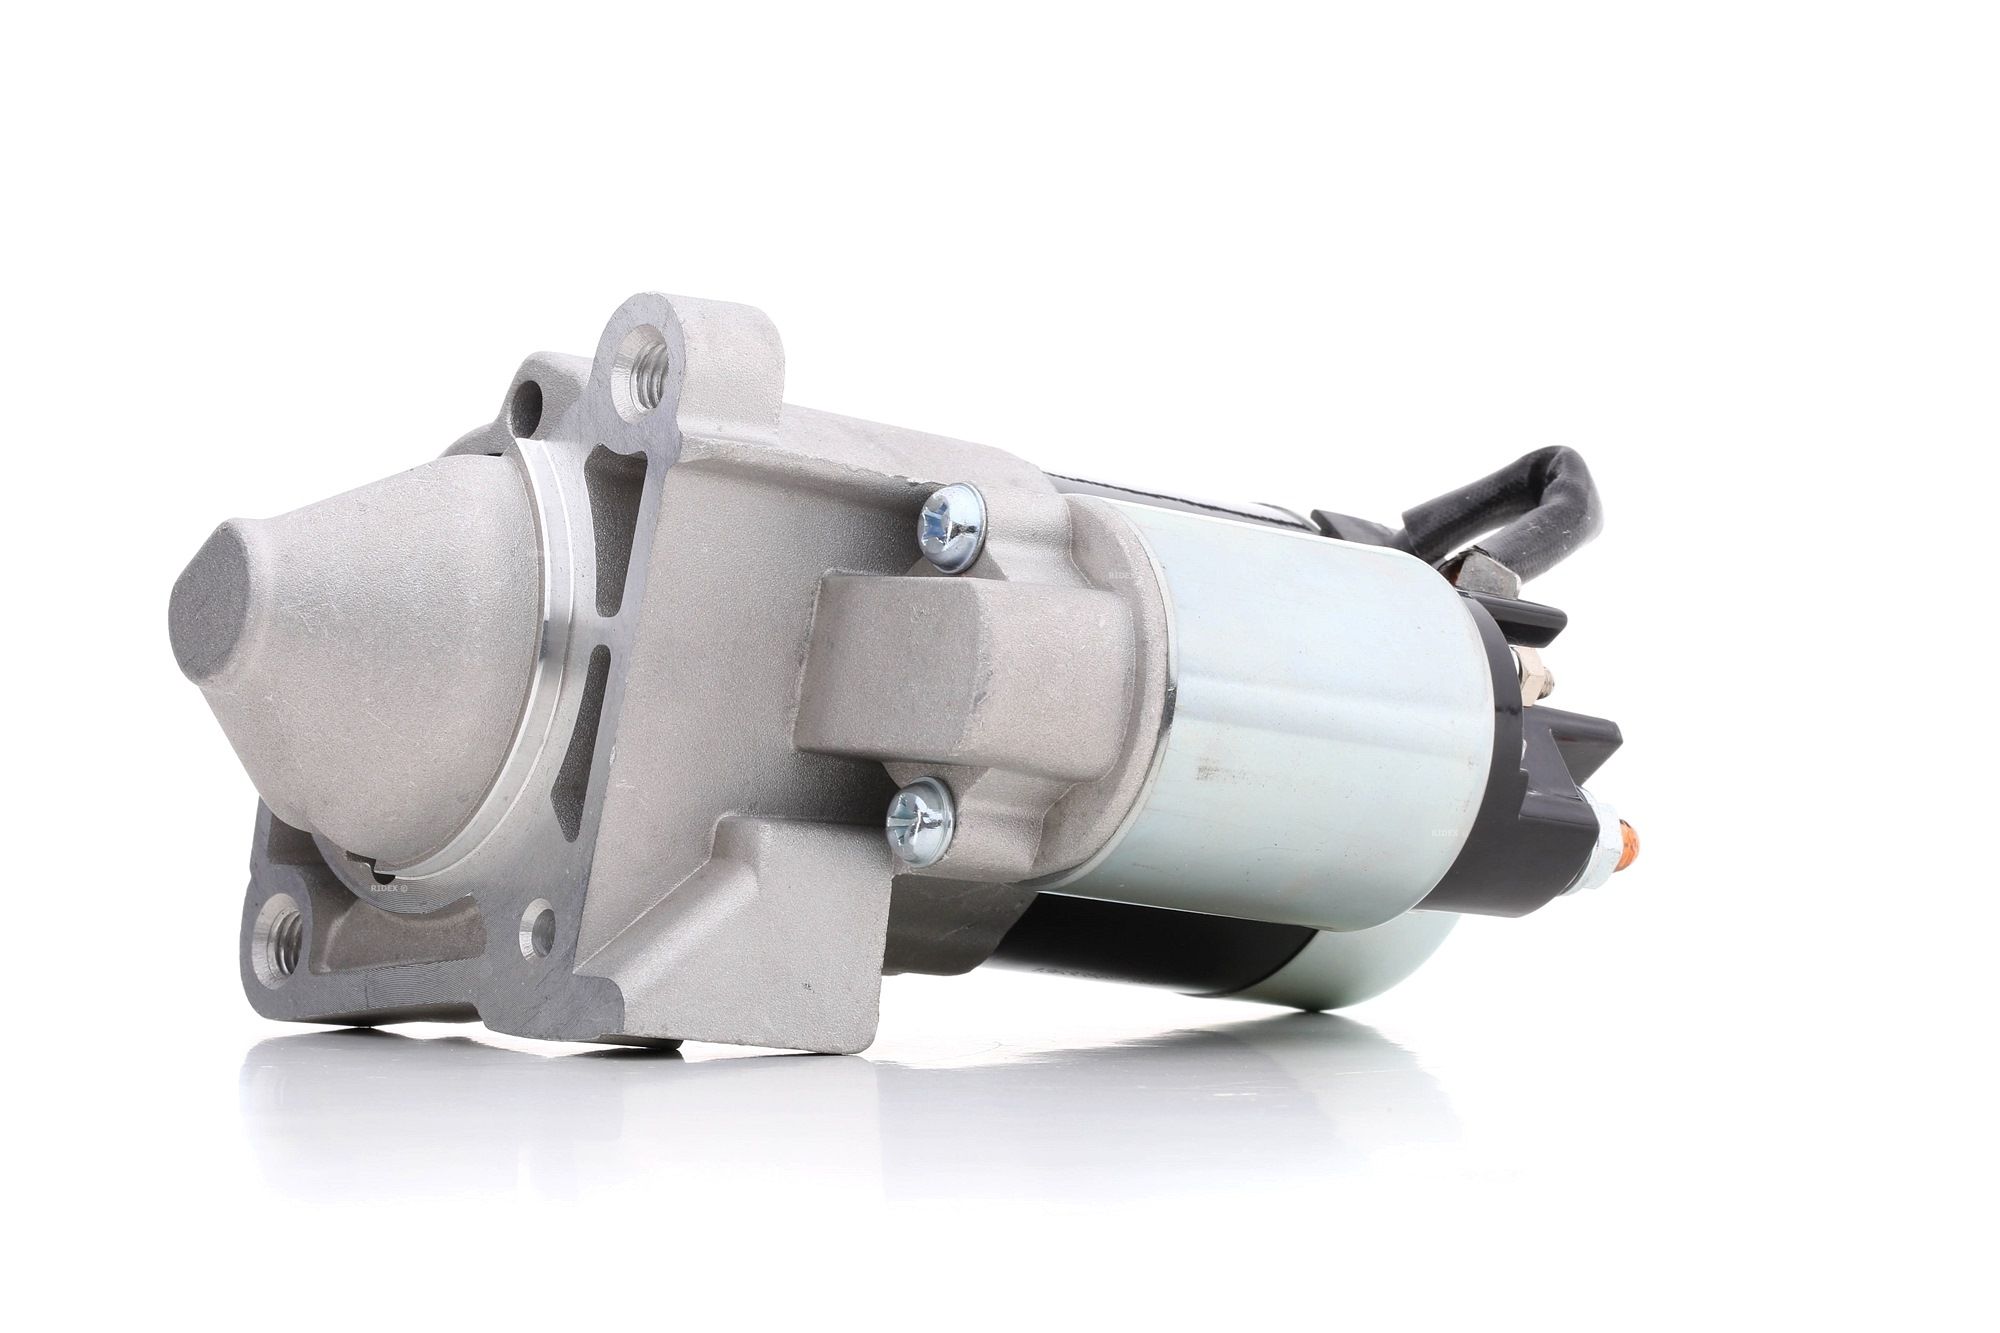 2S0146 RIDEX Starter DACIA 12V, 1,4kW, Number of Teeth: 12, M5, with 50(Jet) clamp, M8, M8 B+, Ø 65 mm